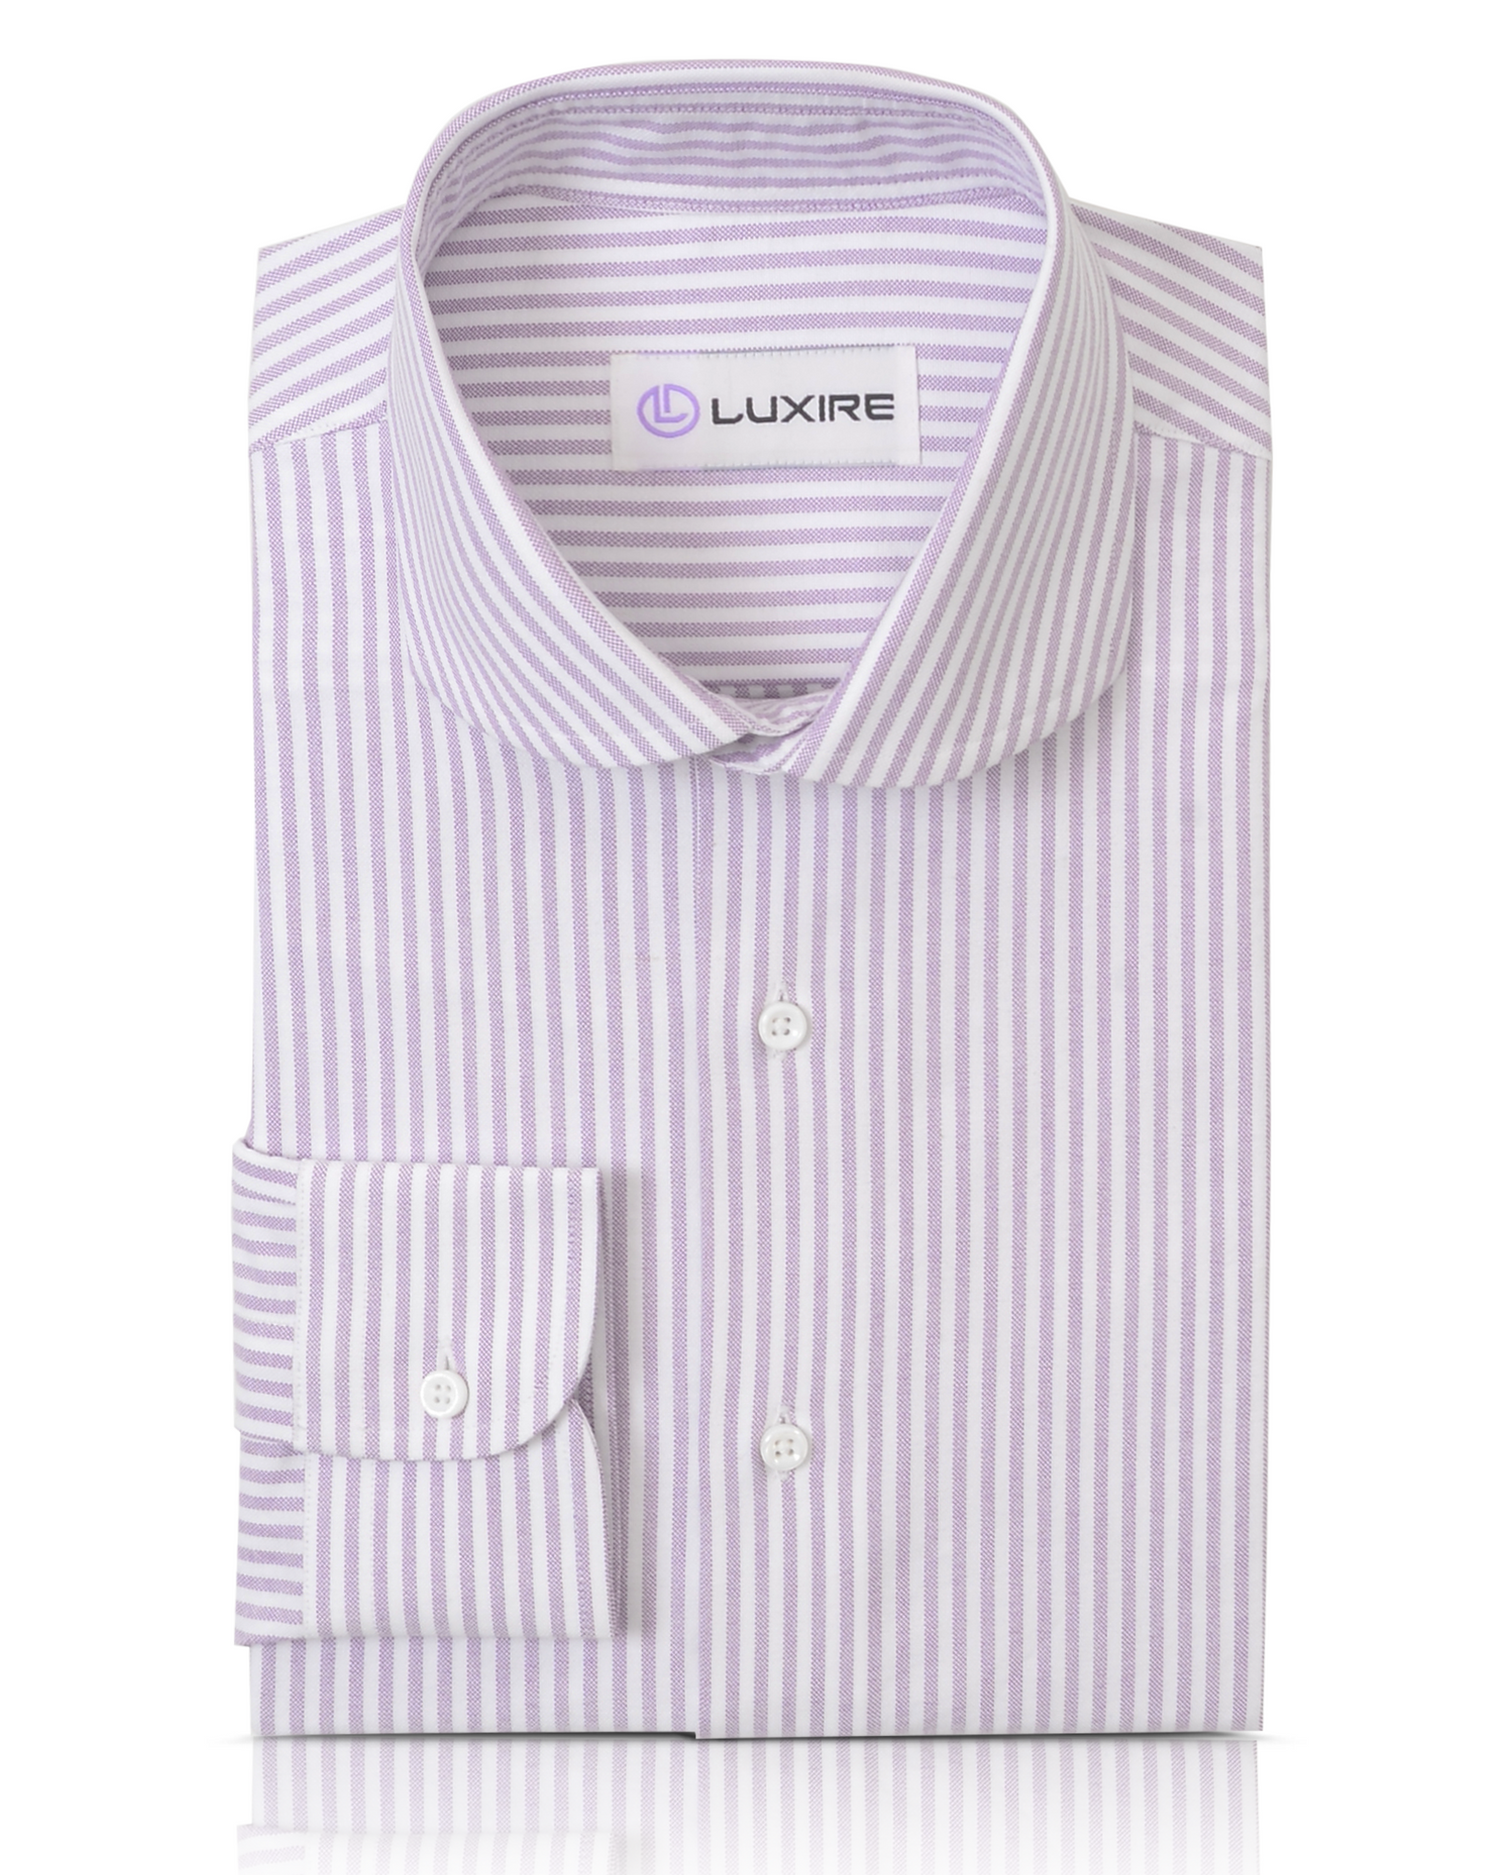 Front of the custom oxford shirt for men by Luxire in white with pale mauve stripes